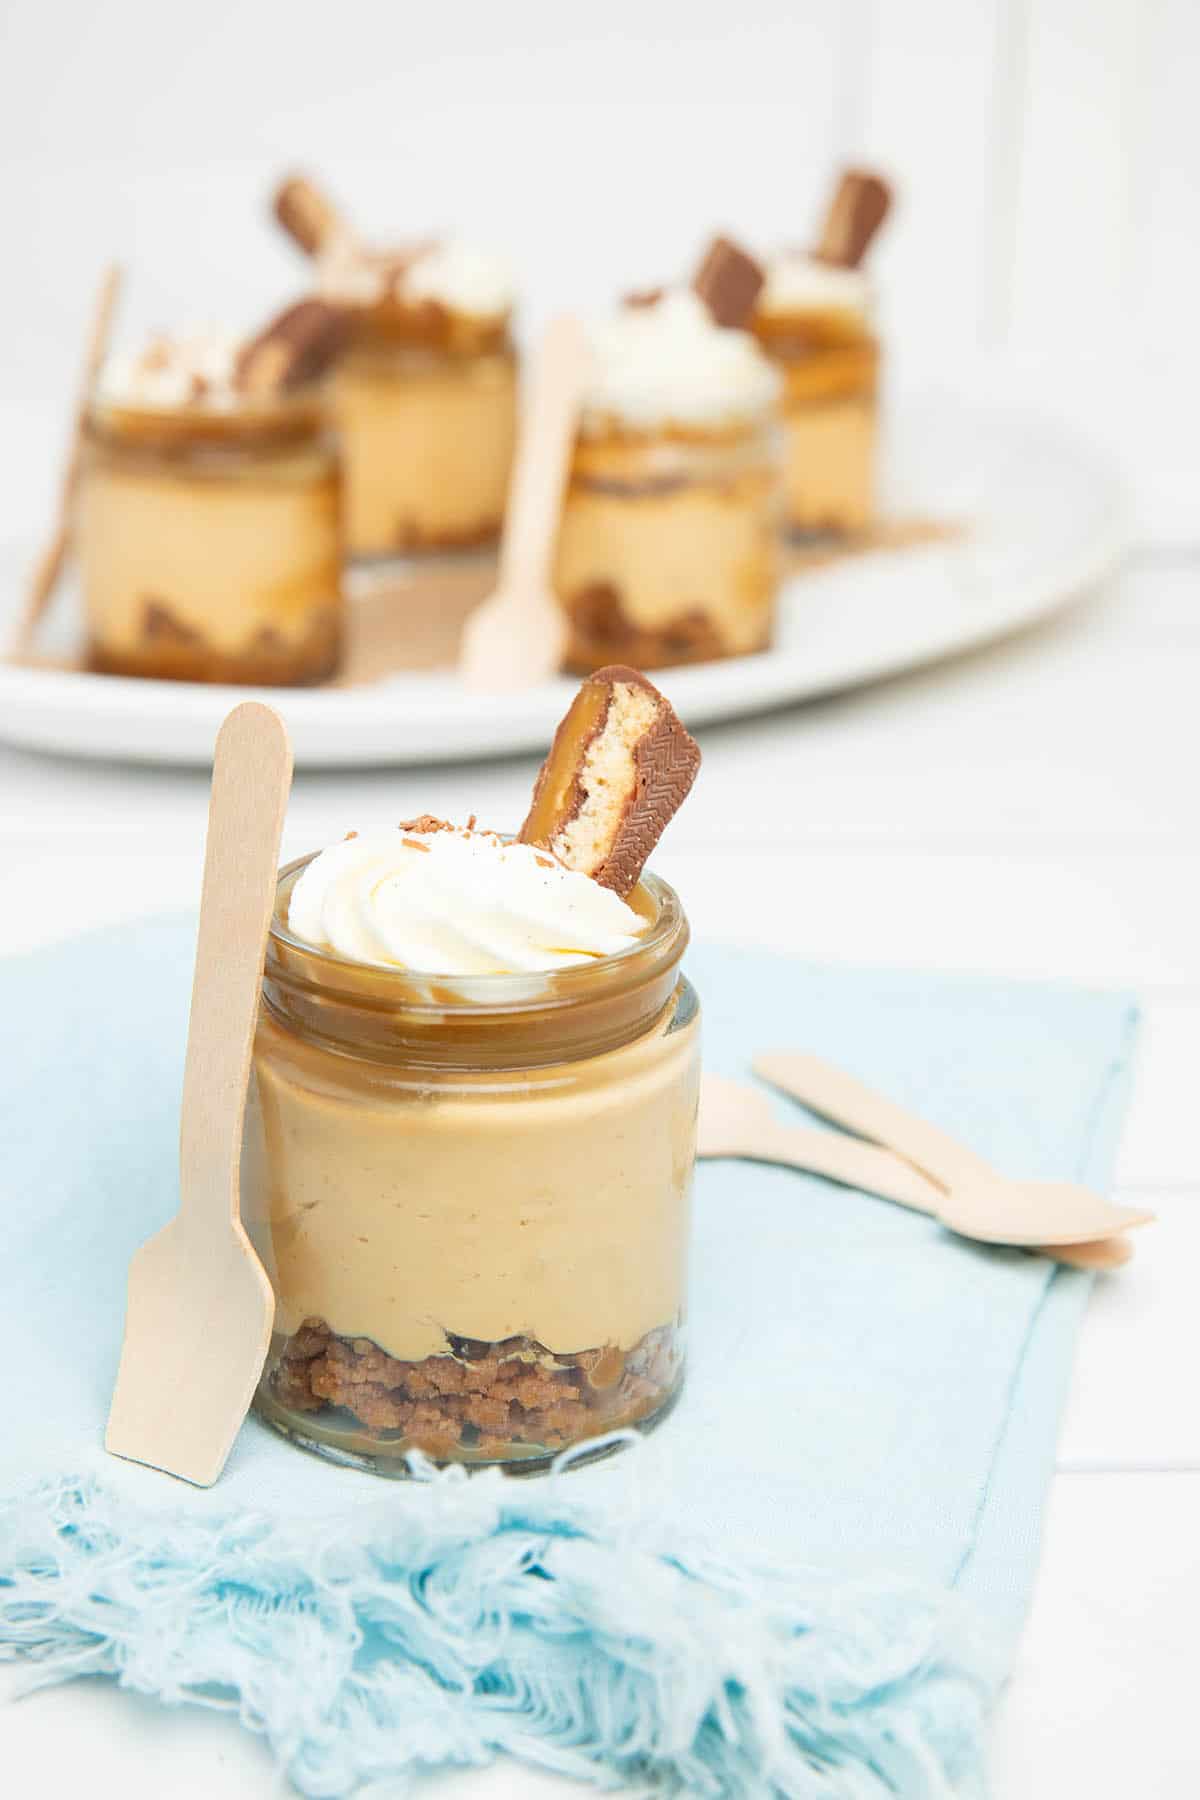 Little pots of cheesecake on a blue napkin.